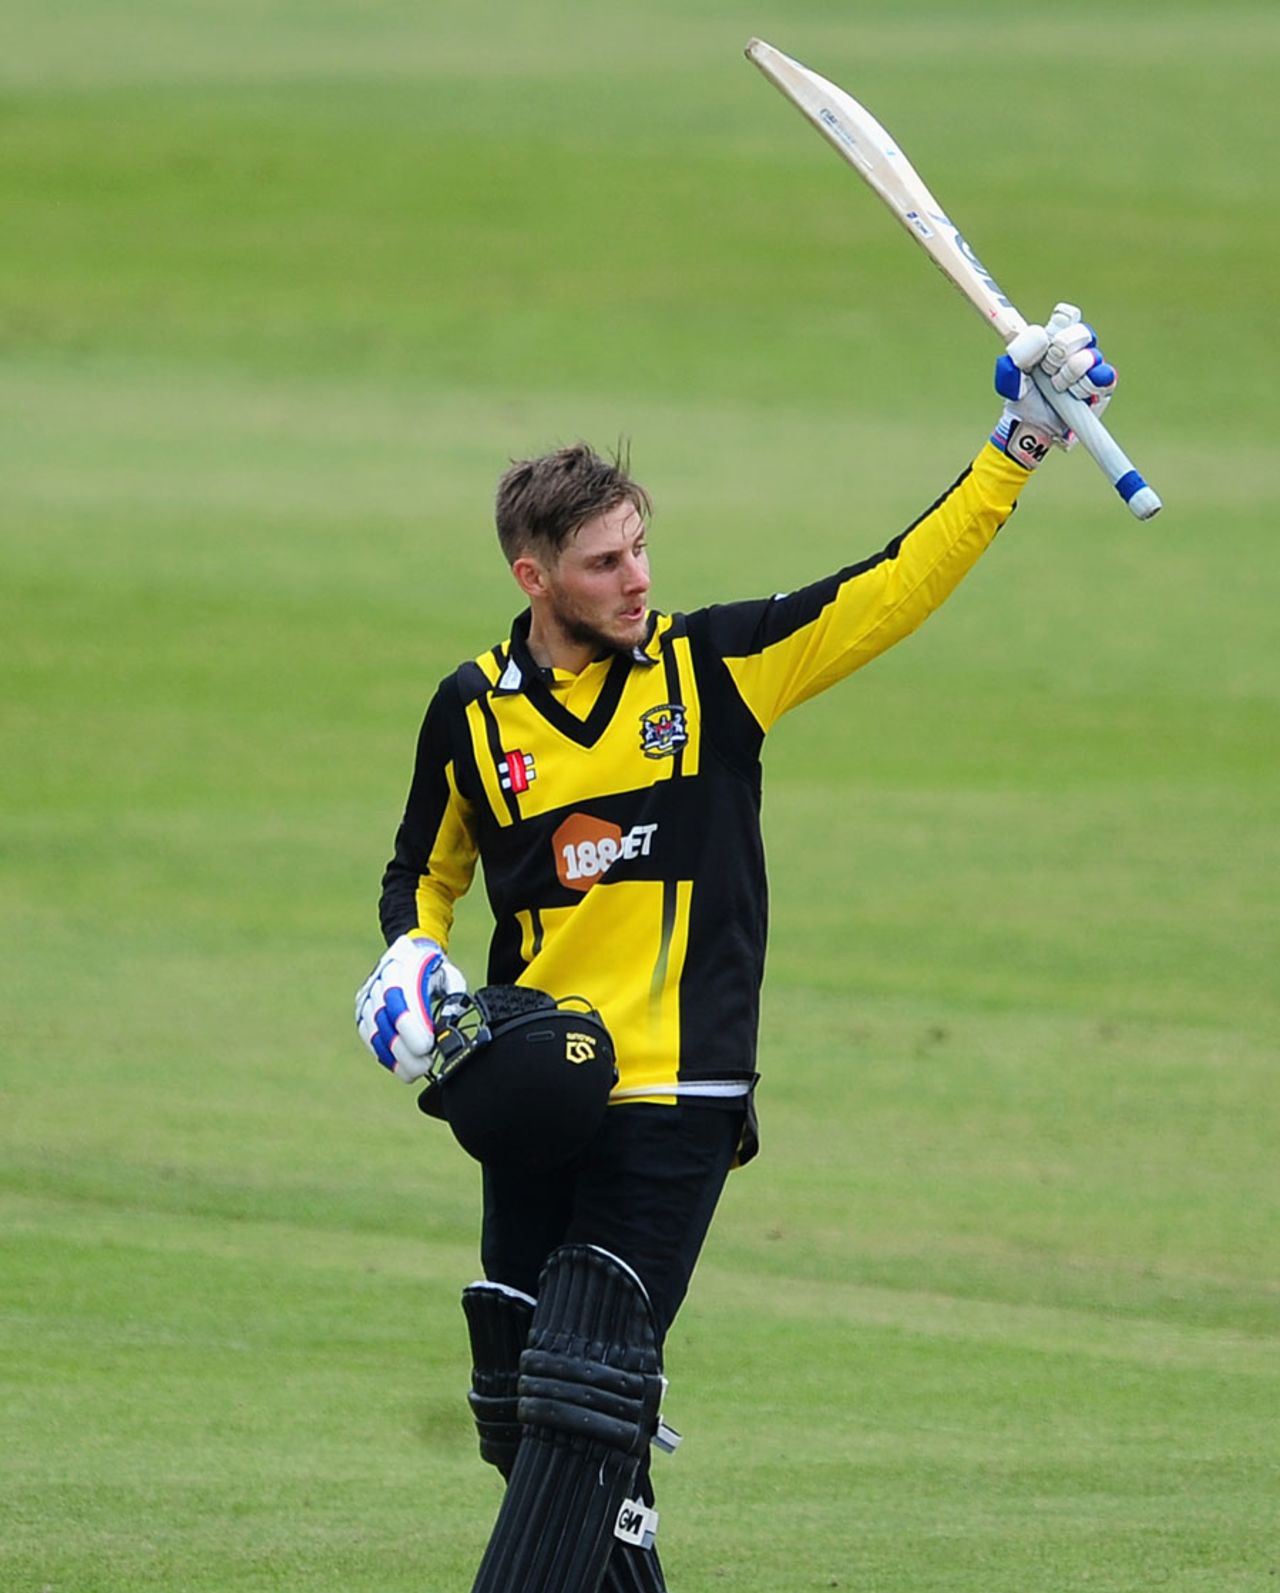 Chris Dent acknowledges his century, Somerset v Gloucestershire, Royal London Cup, South Group, Taunton, June 5, 2016